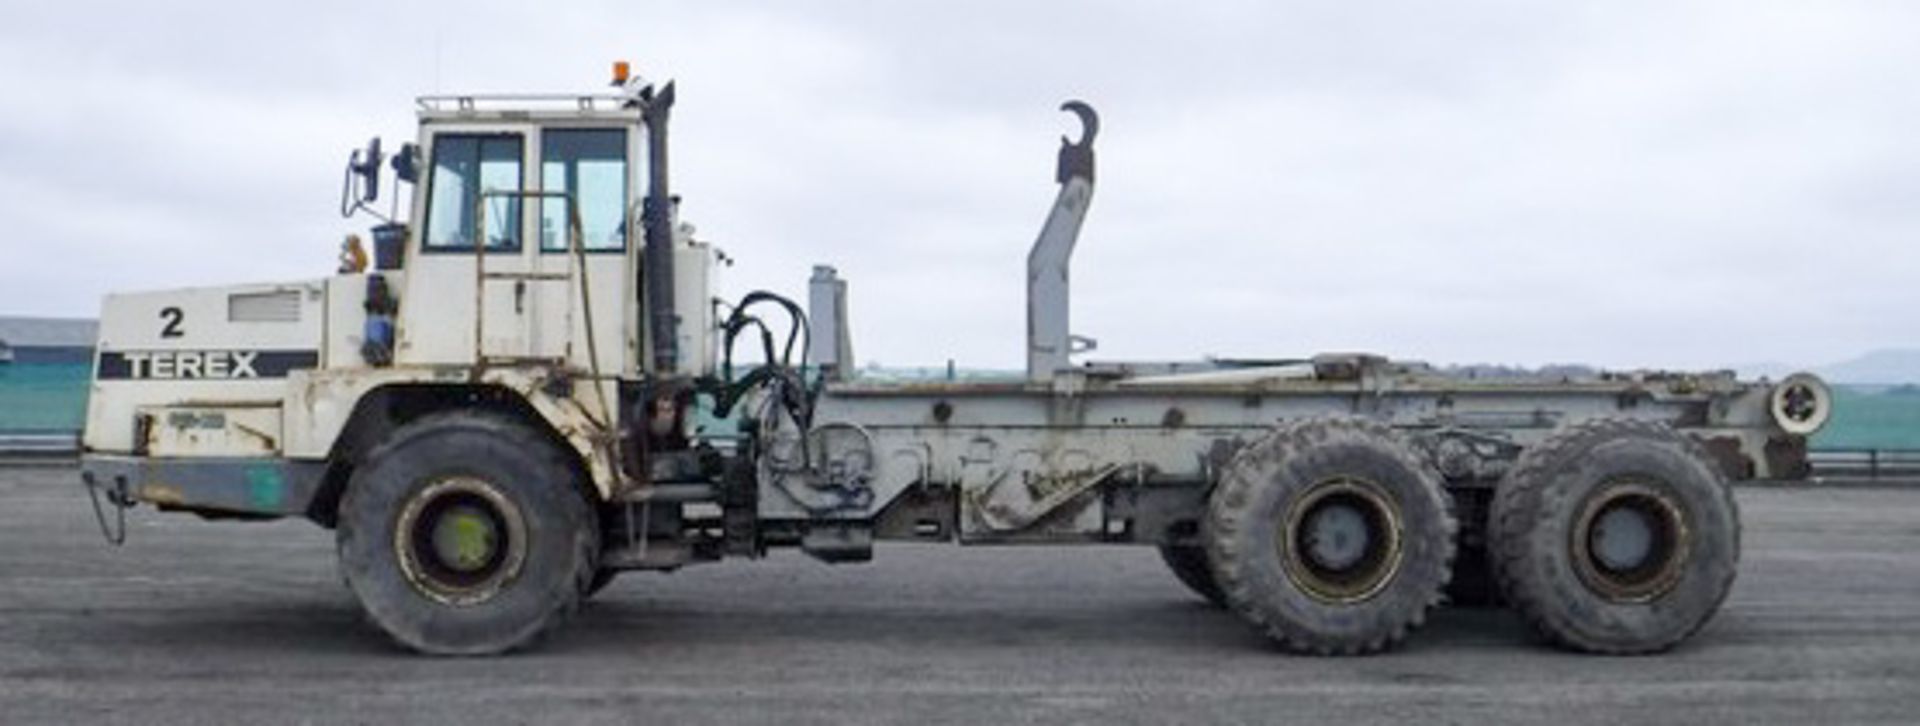 1999 TEREX TA 25, S/N 7961012, SERVICED EVERY 500HRS, USED FOR BREAKDOWN COVER - Image 17 of 18